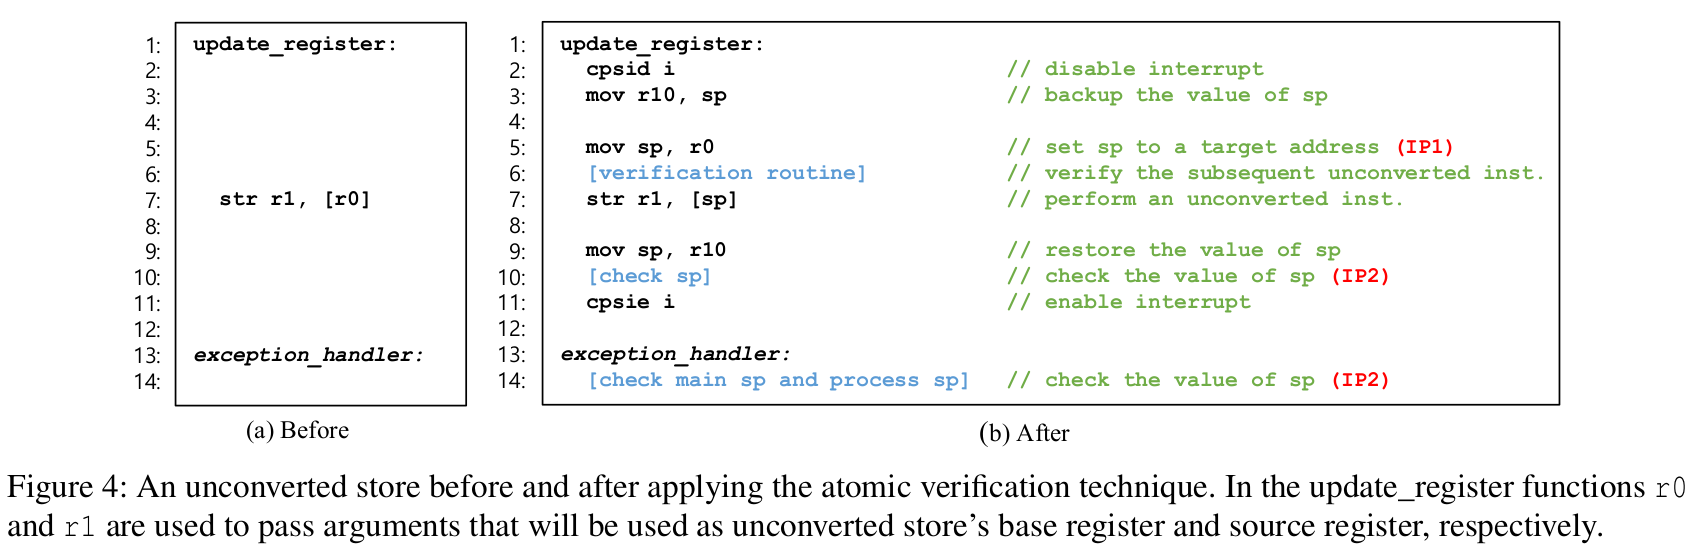 use sp as dedicated register to store atomic verification routine address